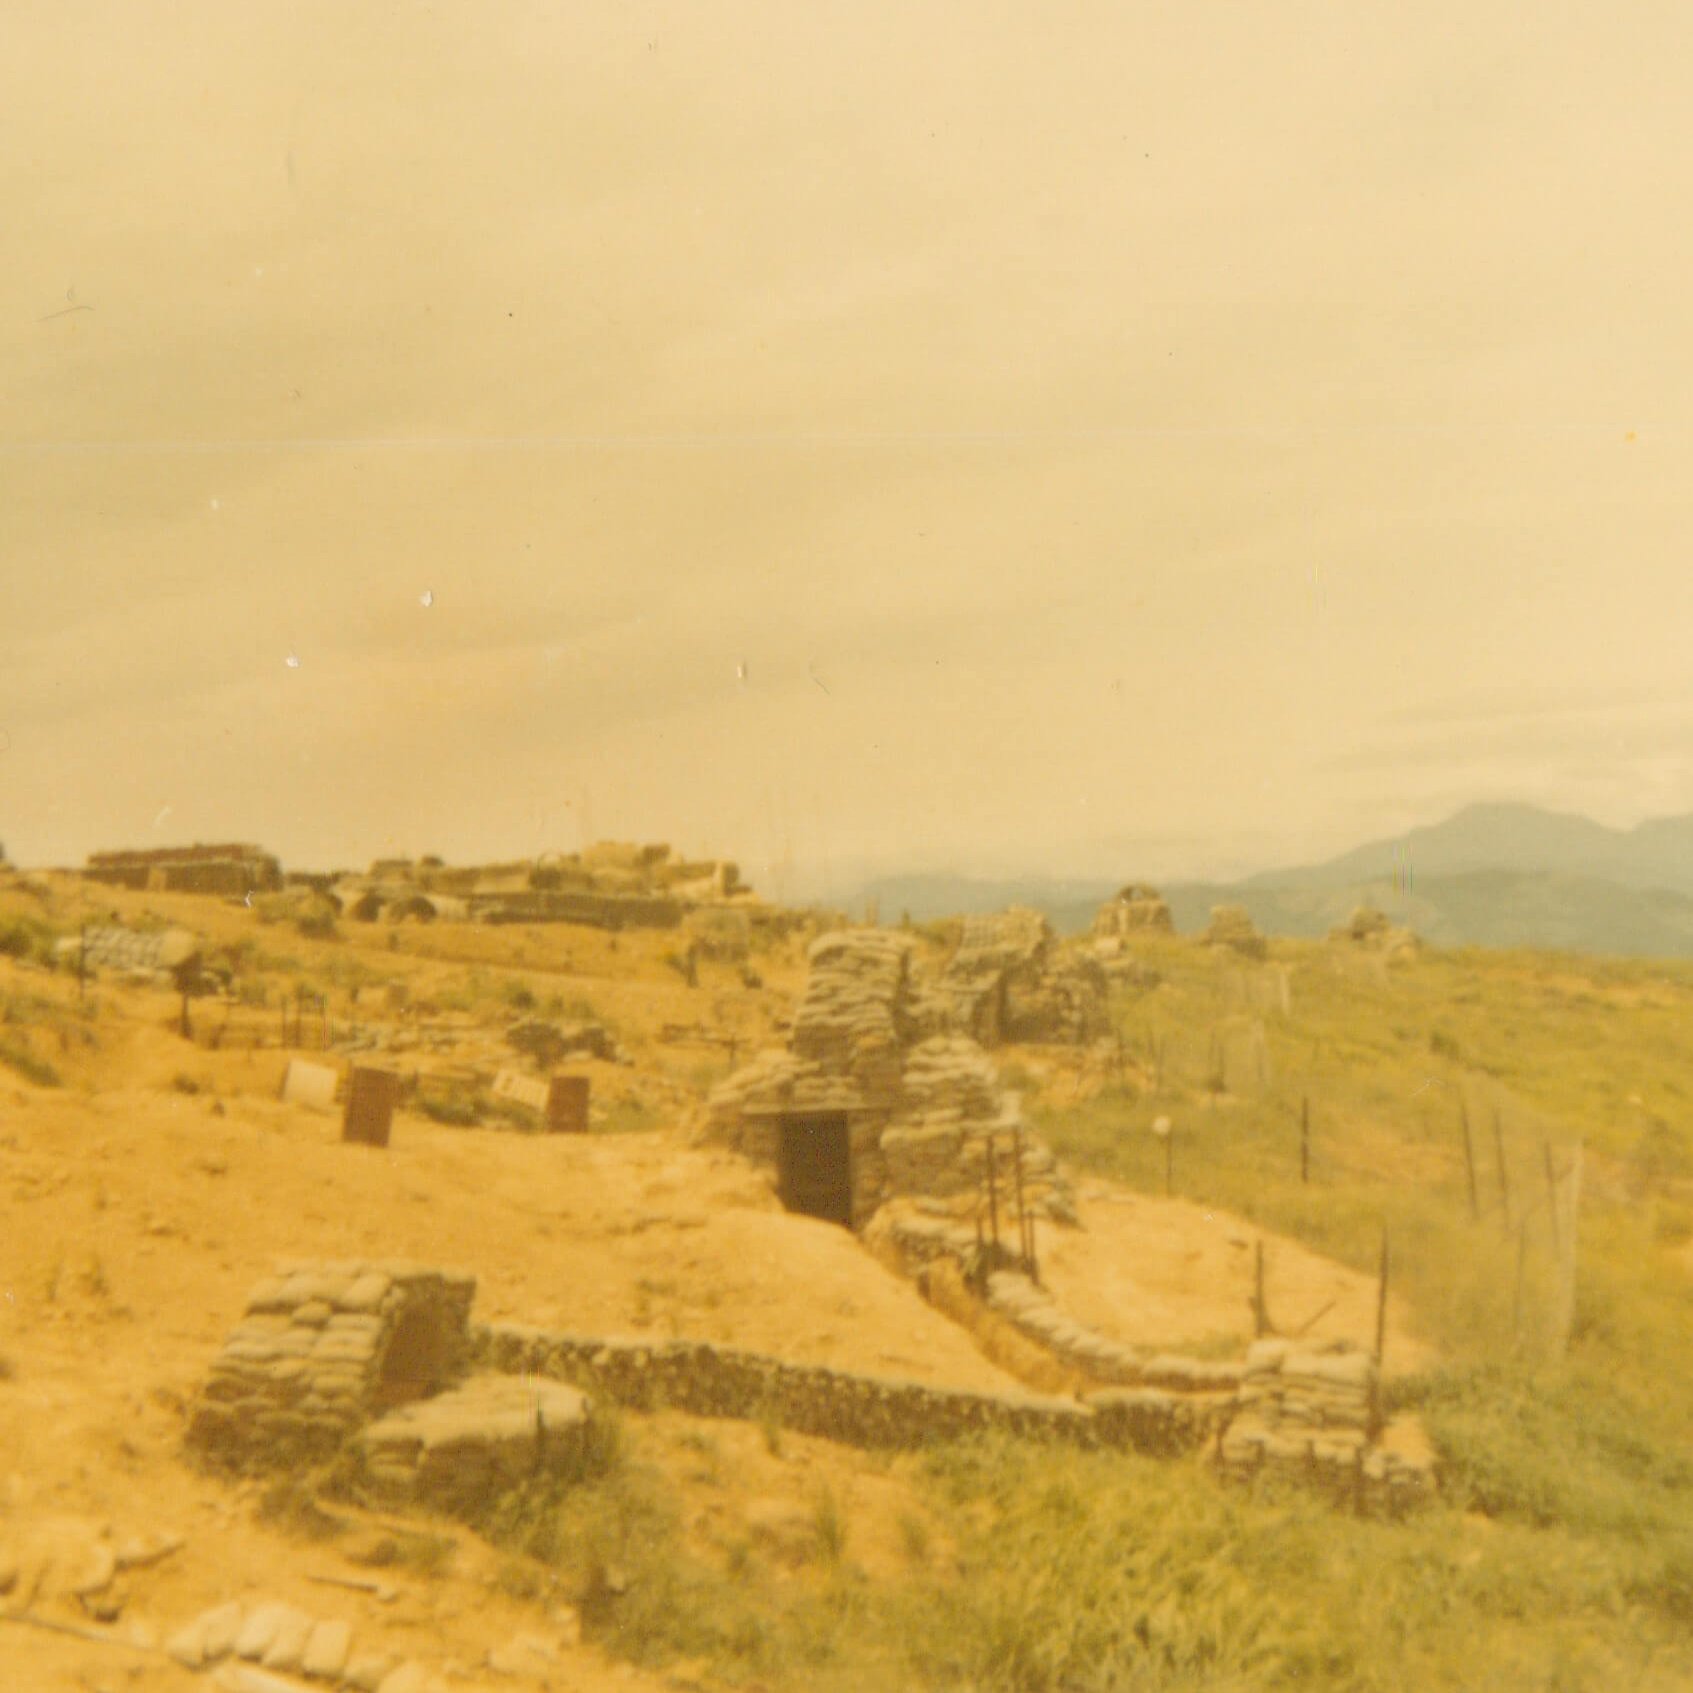 An encampment with sandbag structures and fencing; mountains are in the distance.